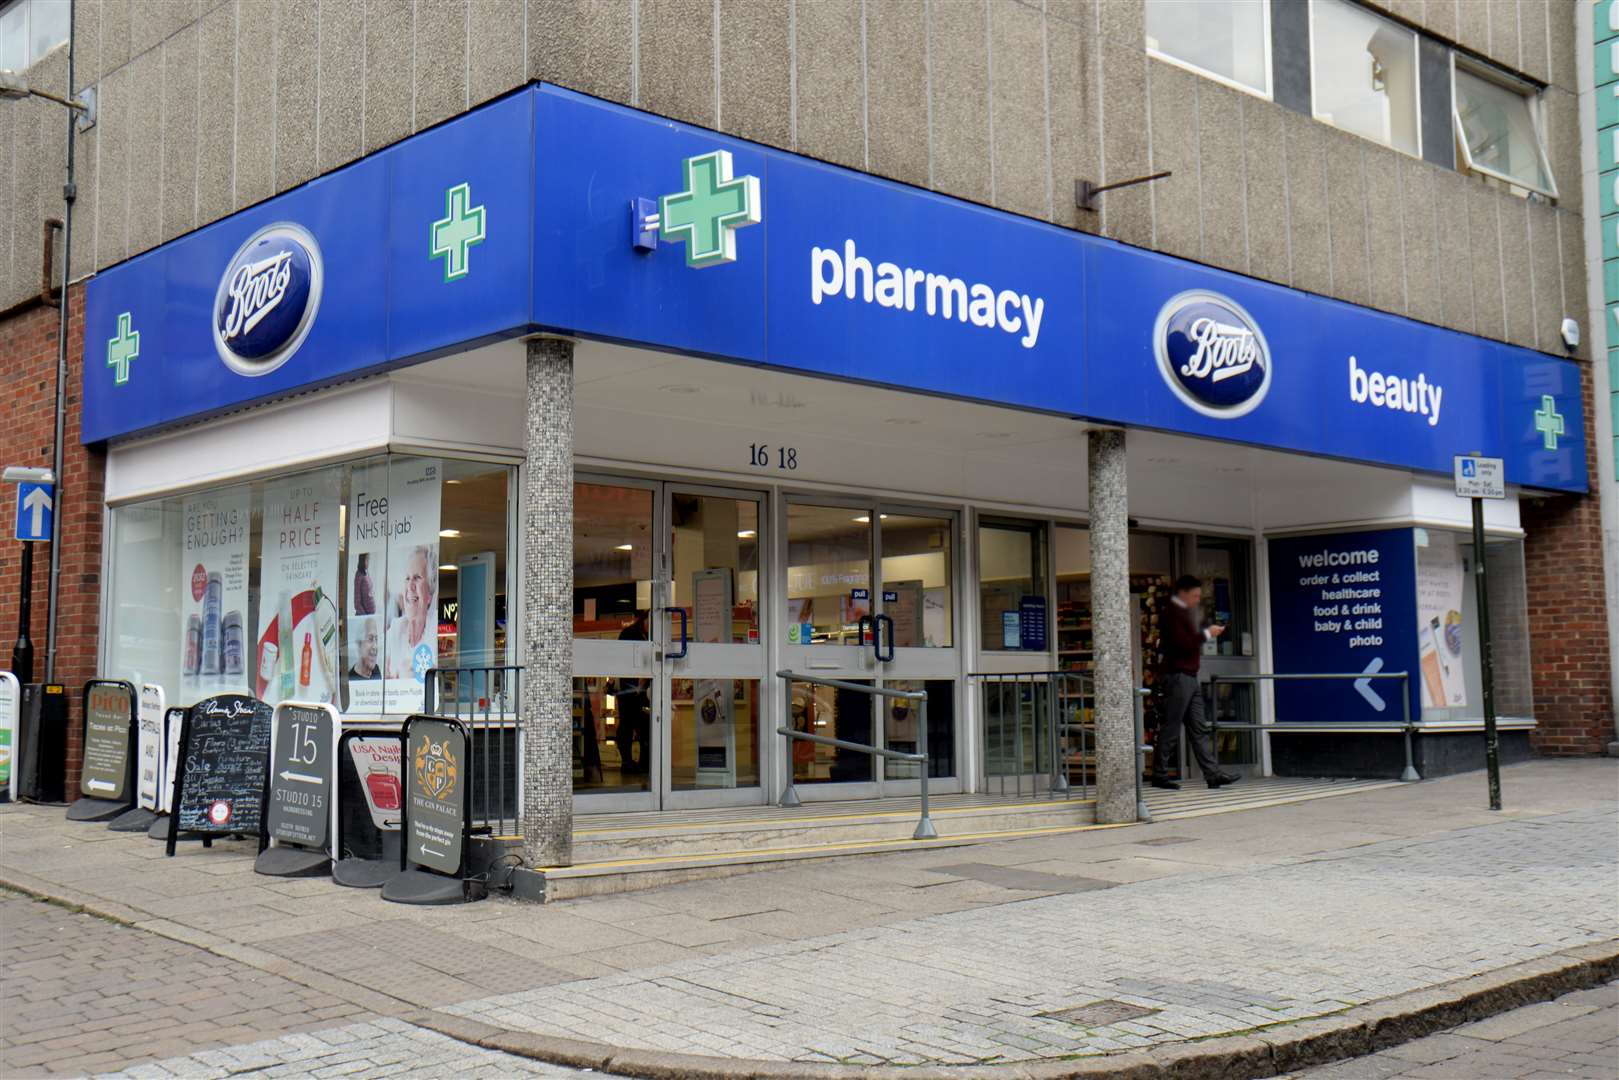 Appointments at Boots stores across the UK are now available to book for September onwards